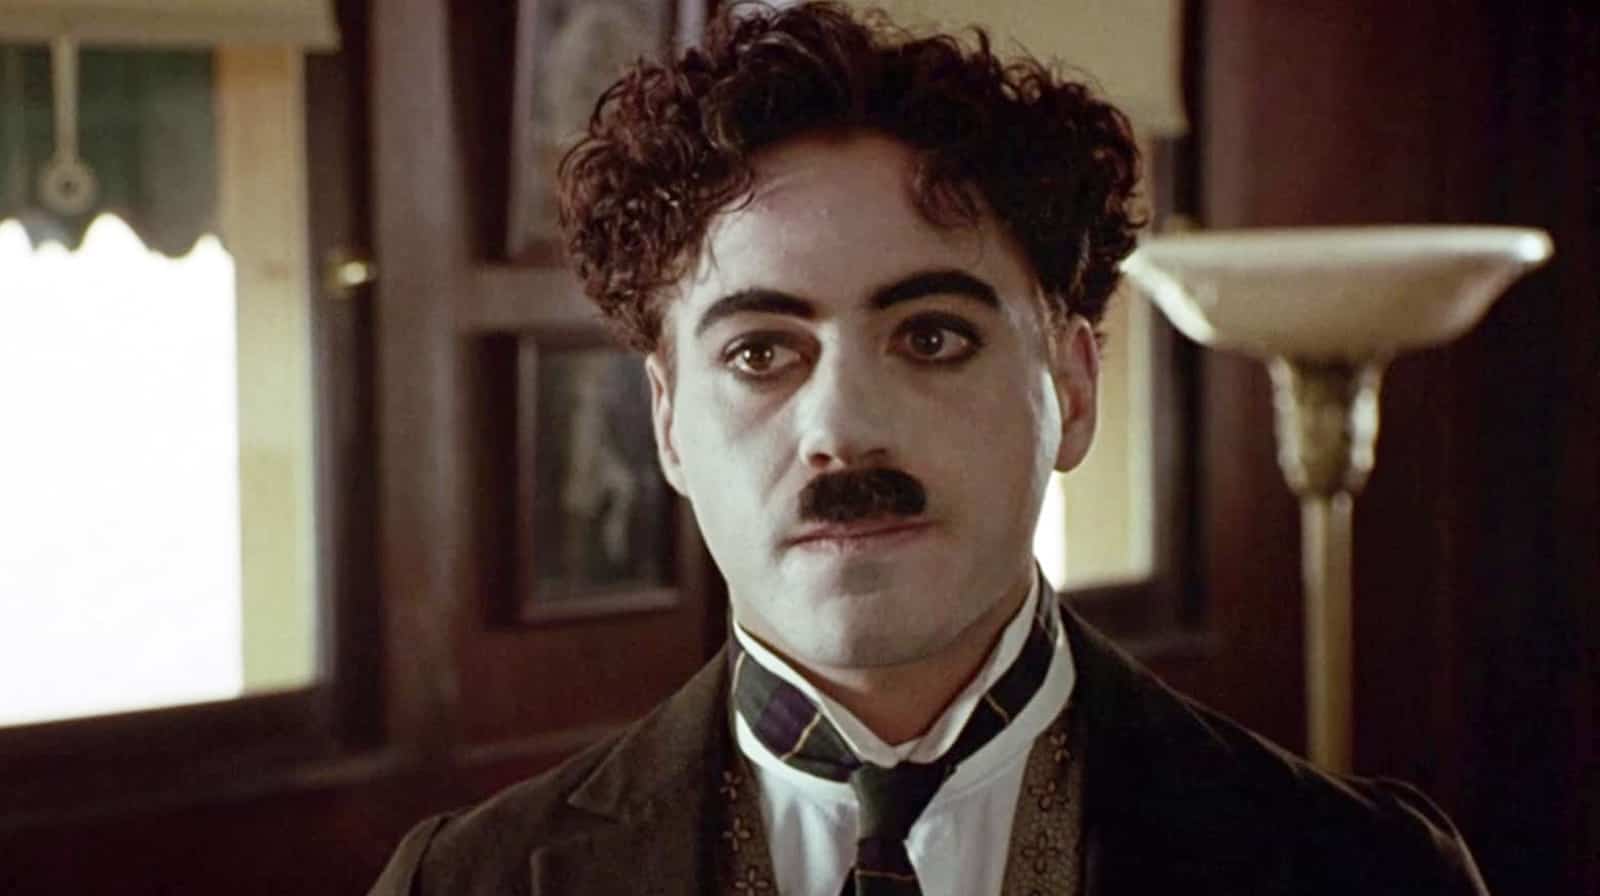 Robert Downey Jr. for the film, Chaplin released in 1992 (Credits: TriStar Pictures)